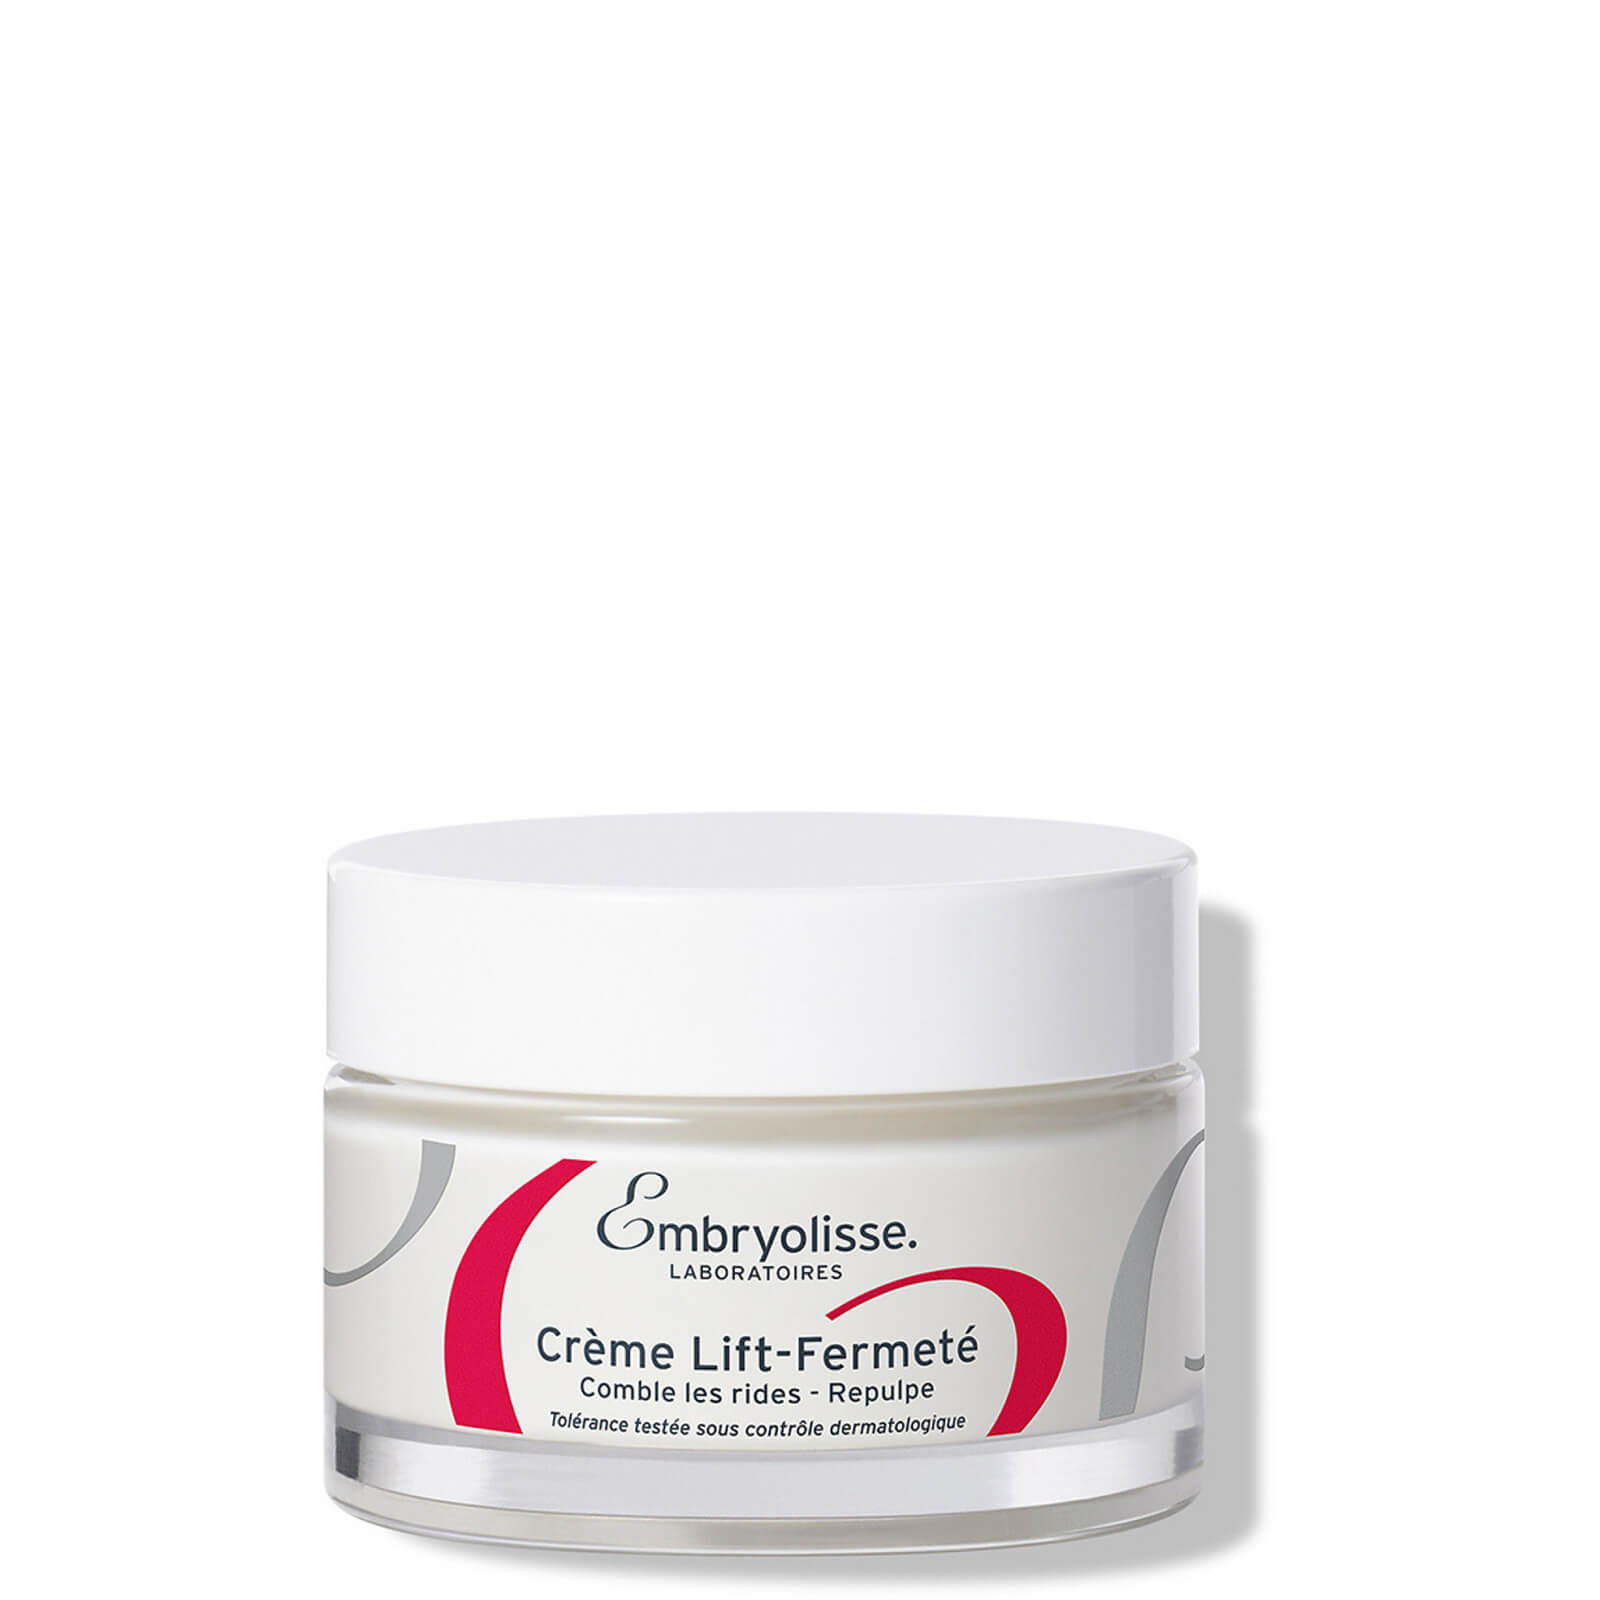 Embryolisse Firming-lifting Cream 50ml In White